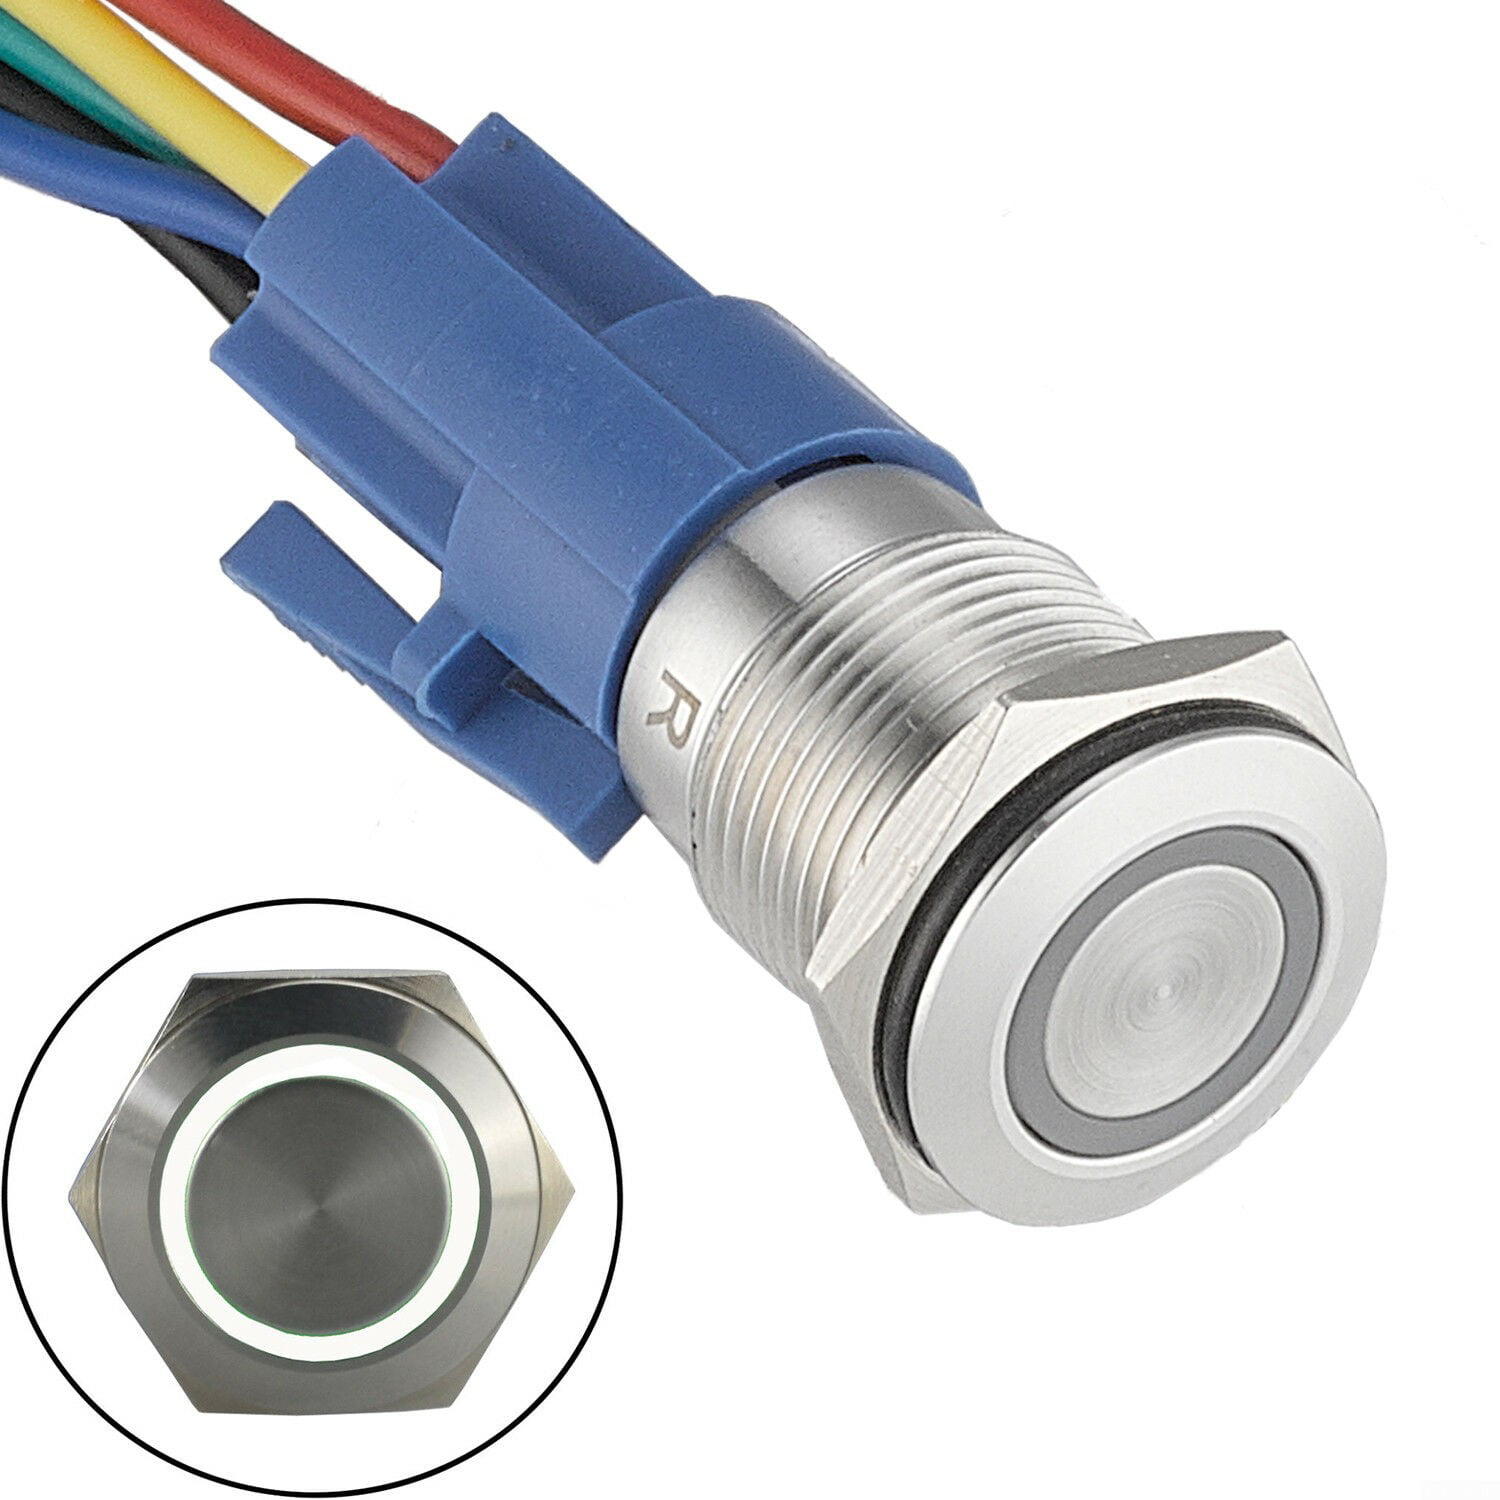 16mm 12V Car Silver Aluminum LED Power Push Button Metal Switch Latching Button 